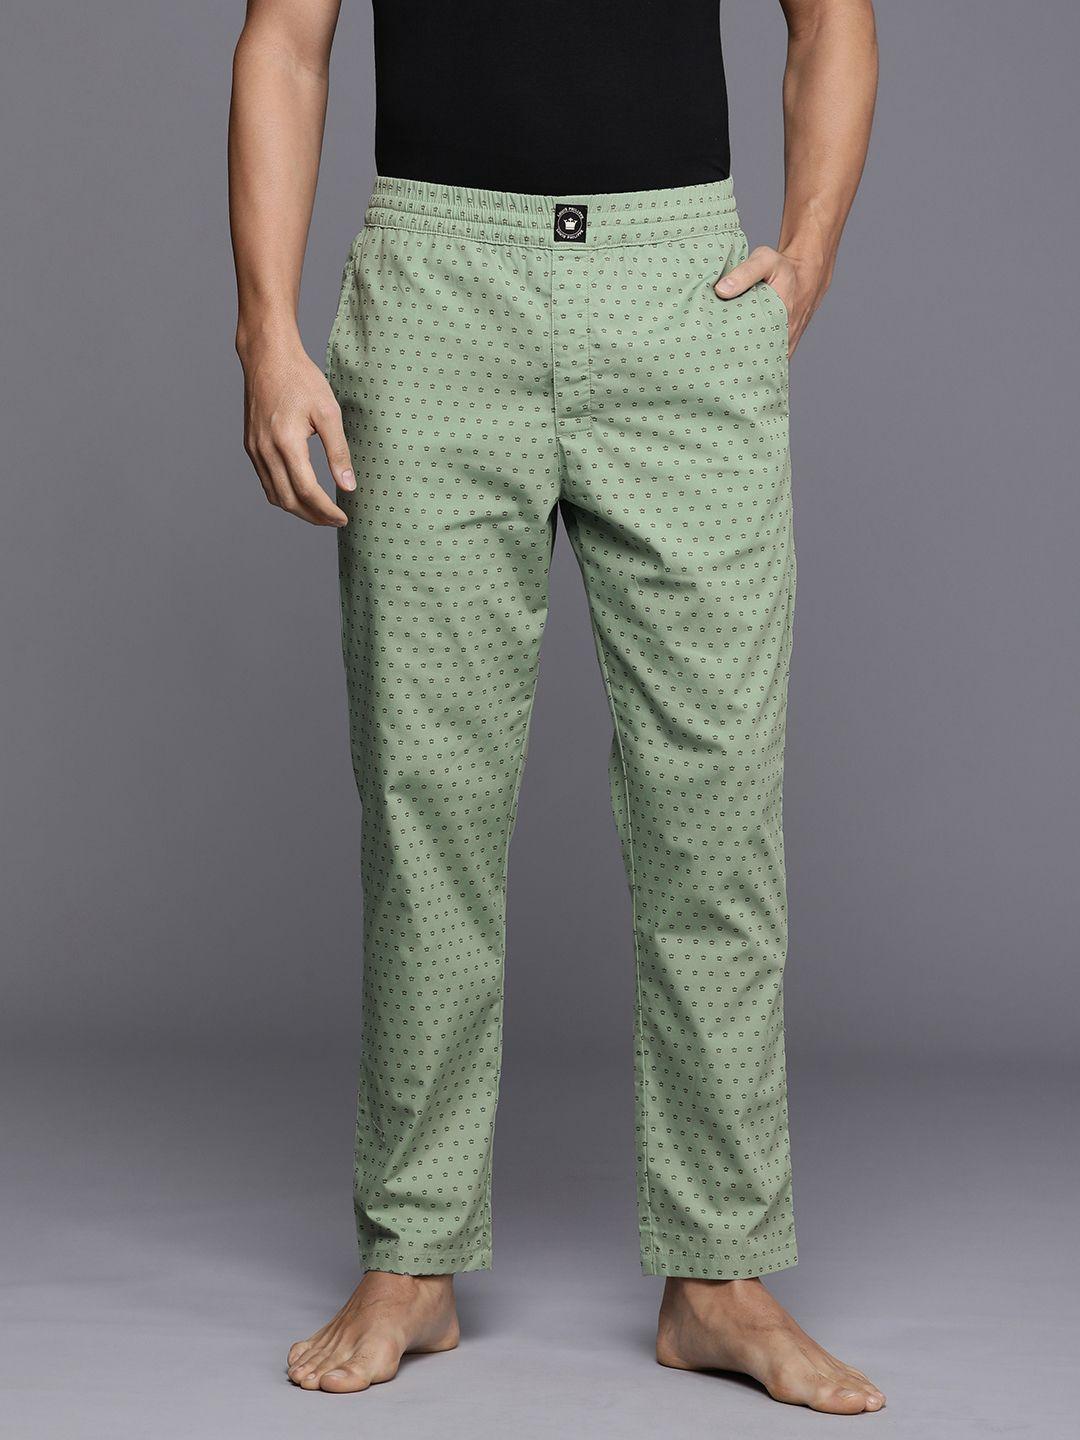 louis philippe athplay men pure cotton brand logo printed lounge pants